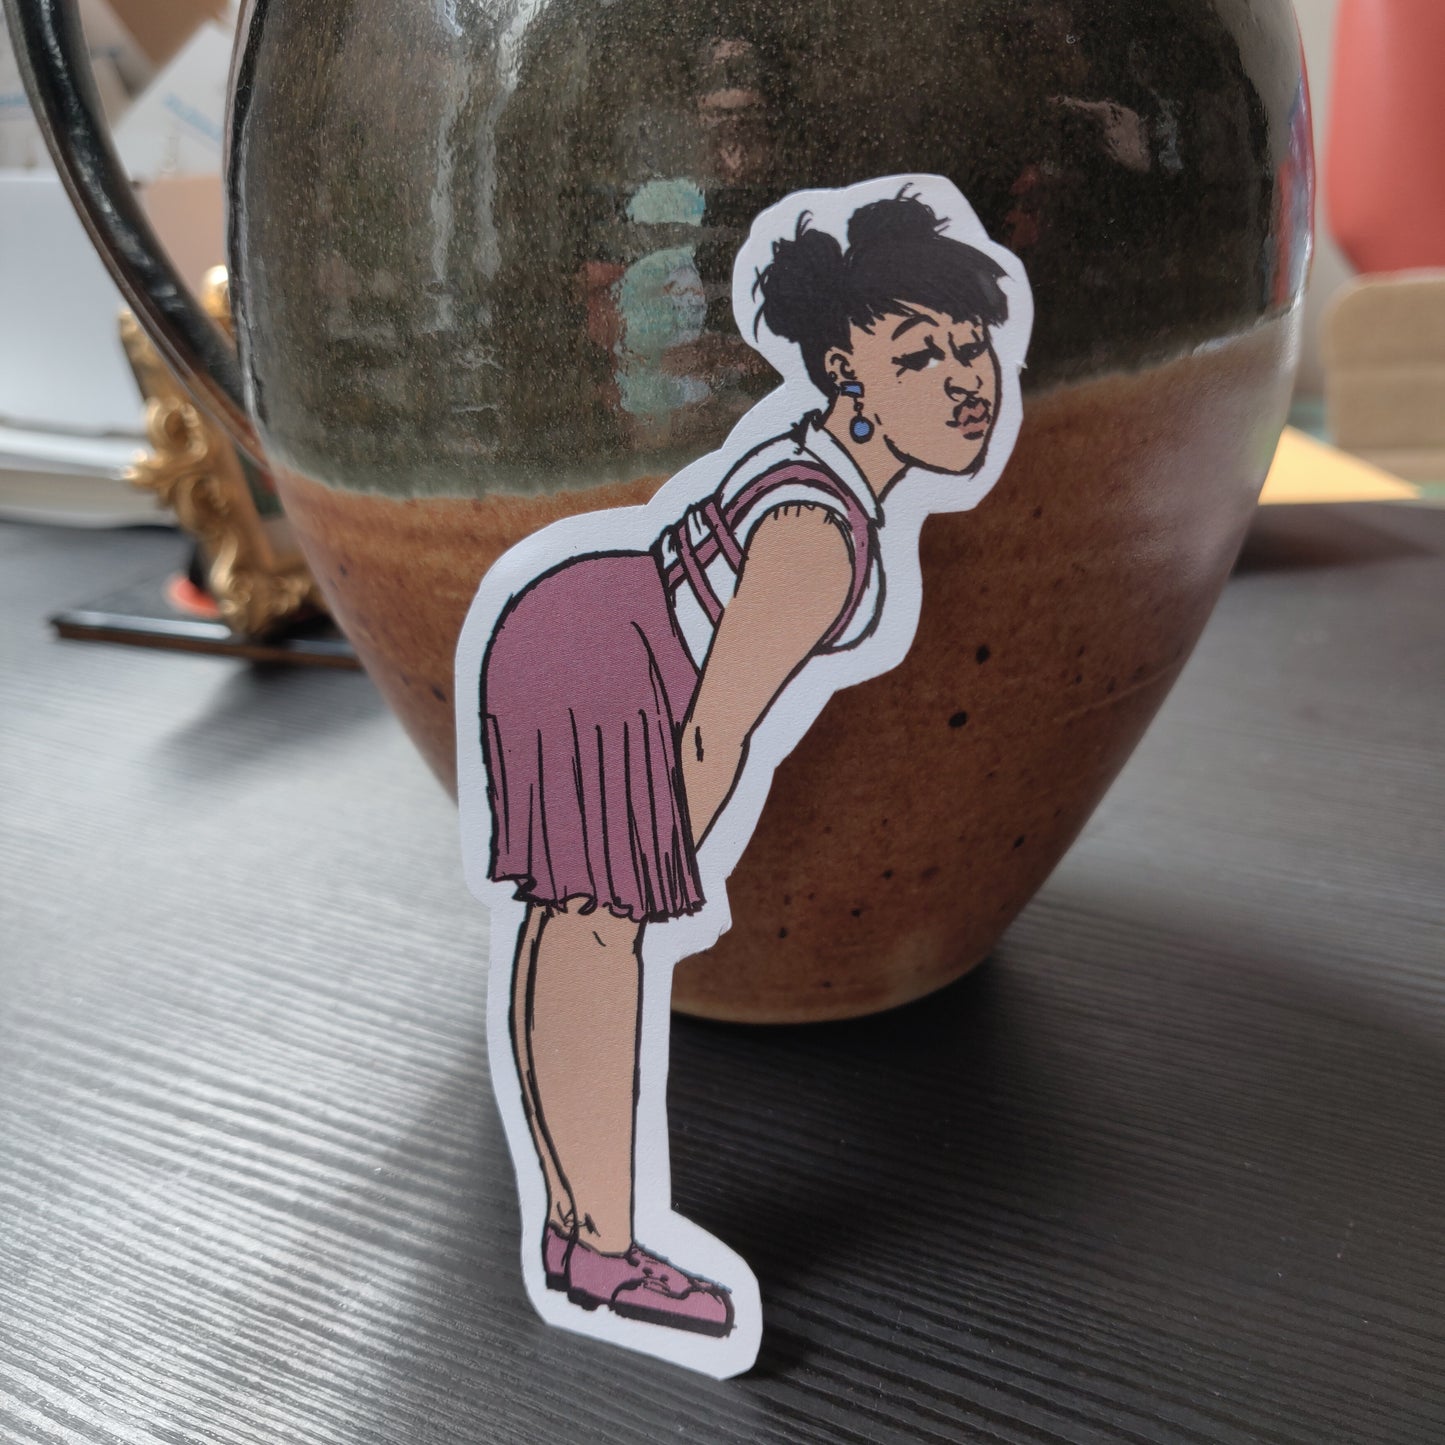 Girl Gang STiCKERS by @xbelleandwhistle